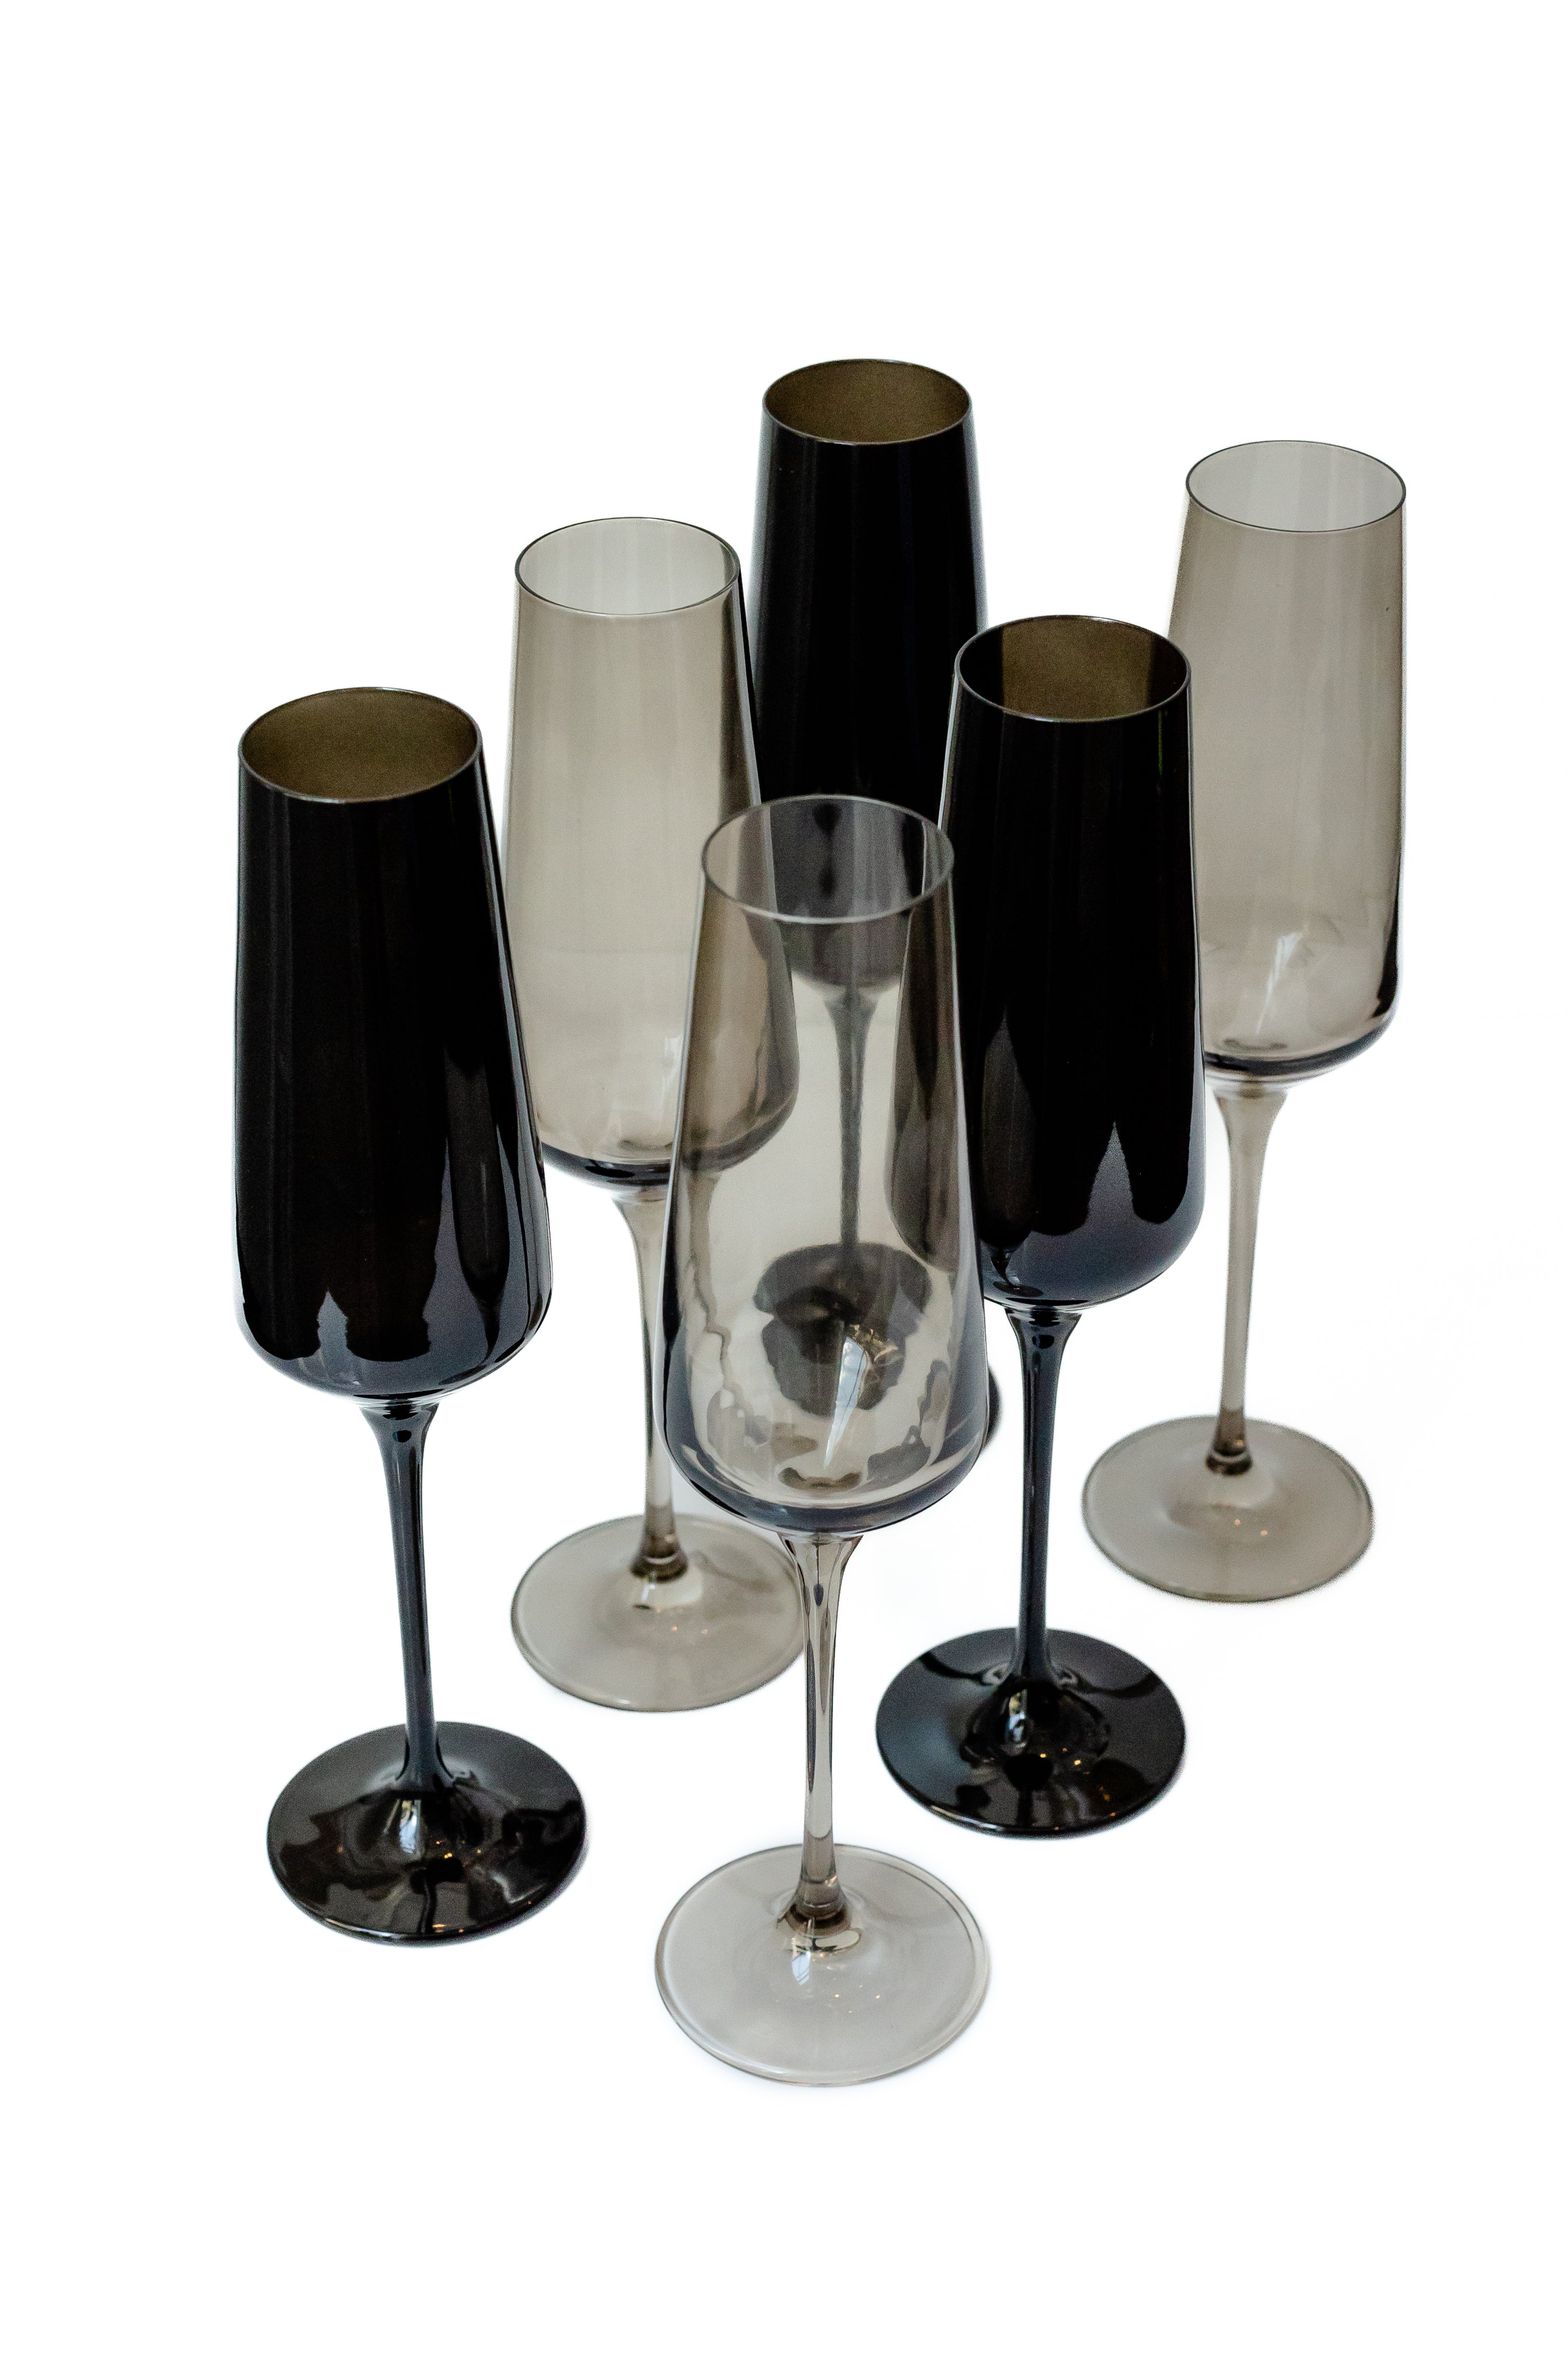 Estelle Colored Glass - Smoked Mixed Champagne Flutes Set - Set of 6